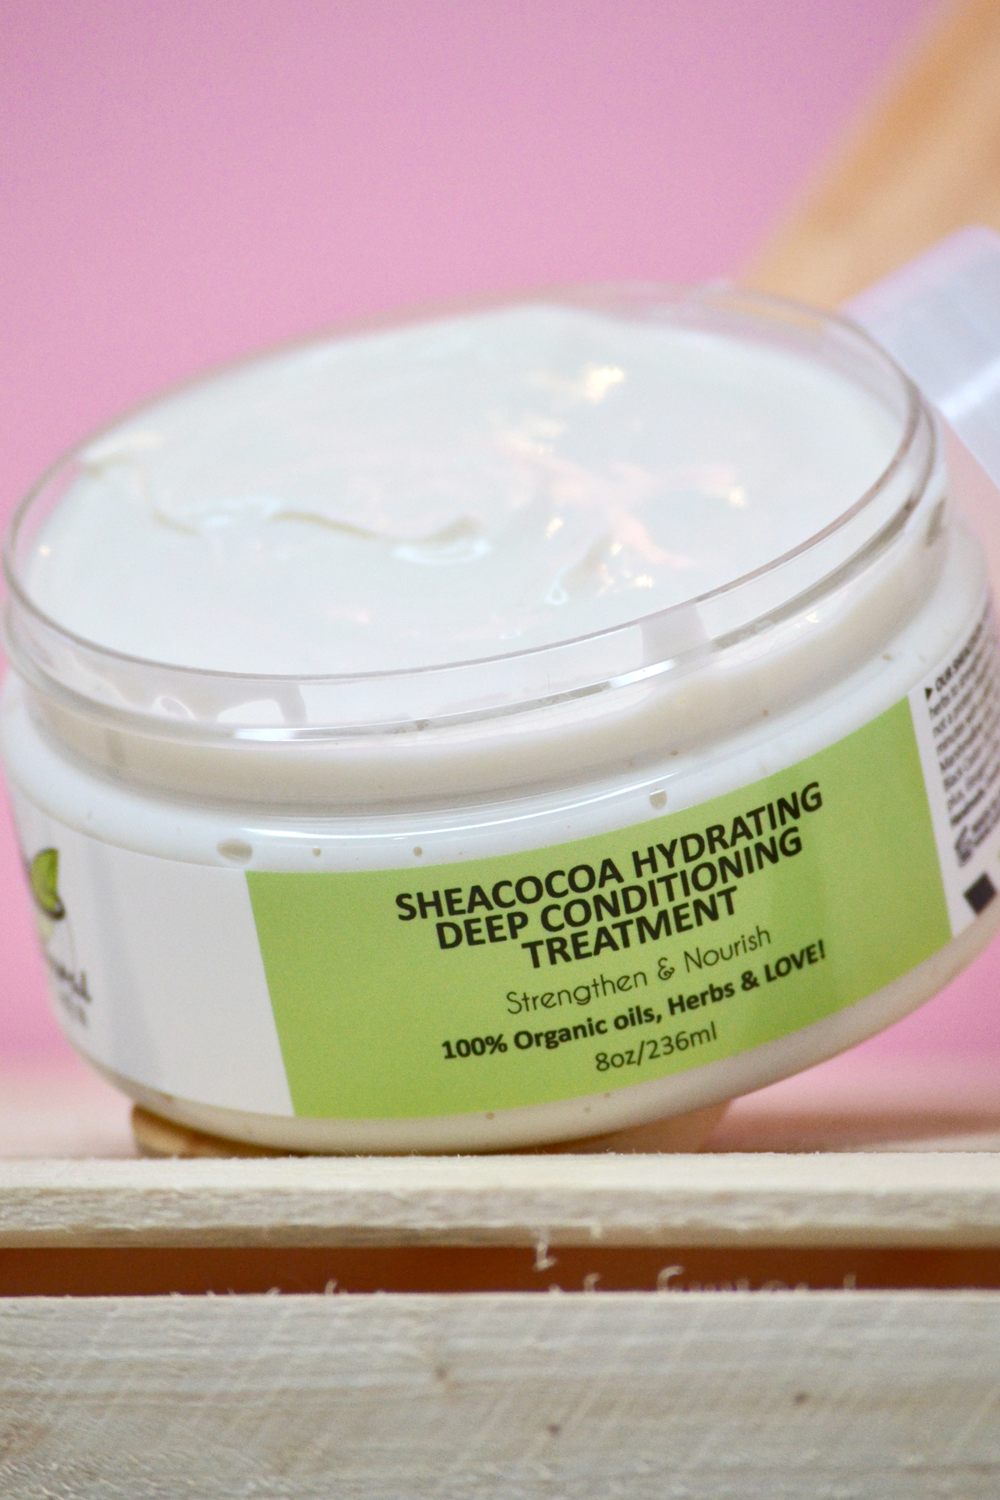 Sheacocoa Hydrating Deep Conditioner